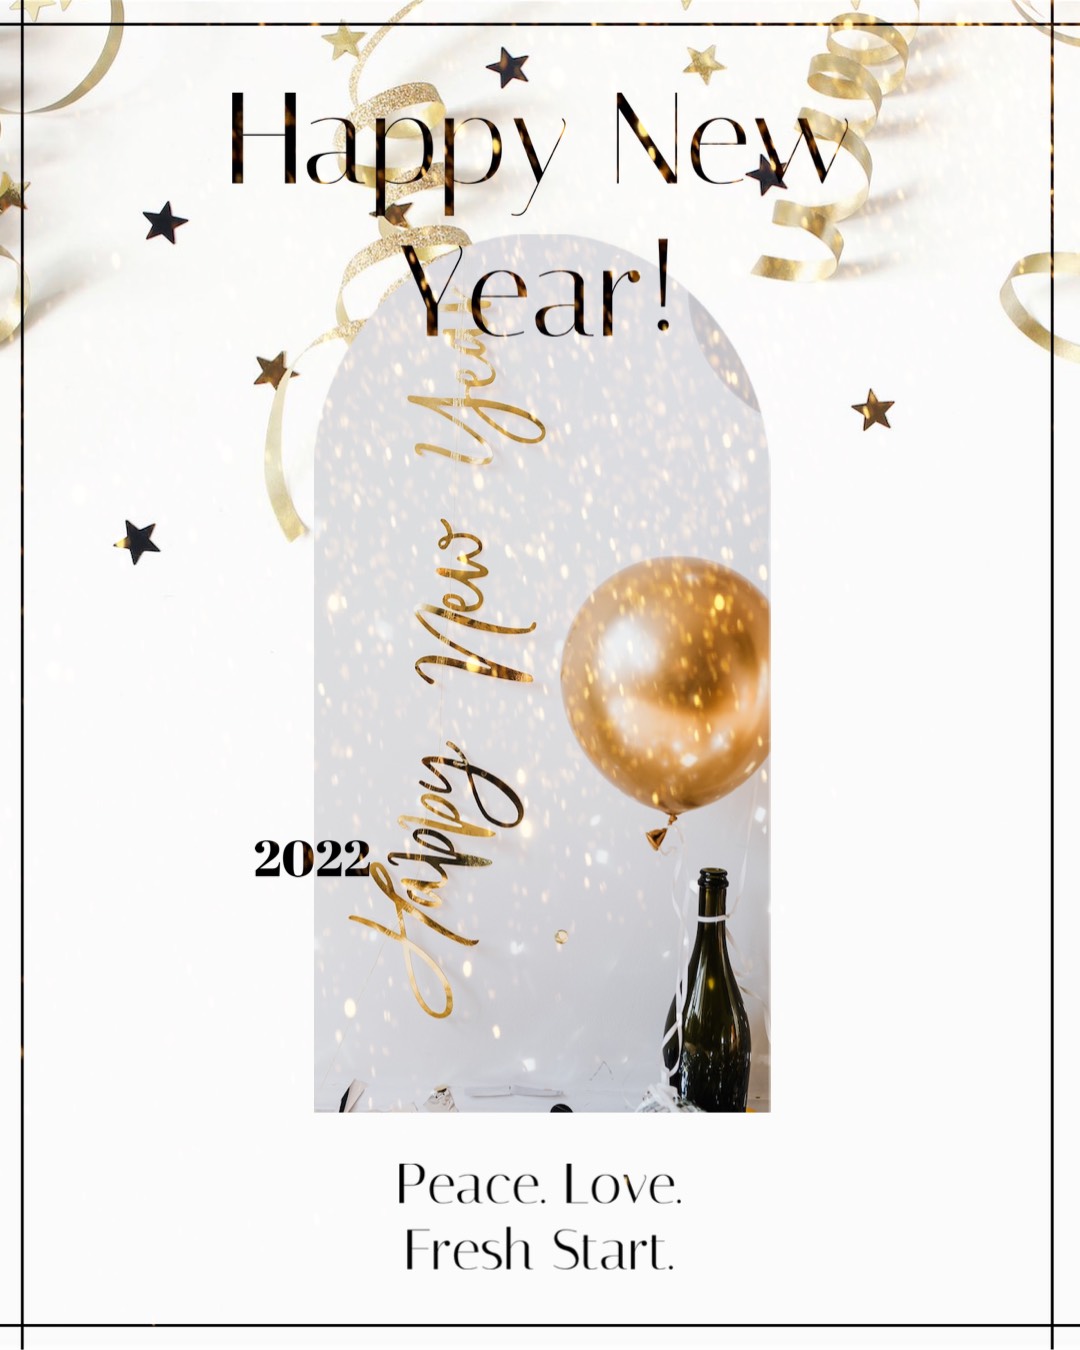 Happy new year 2022! Bottle of champagne with balloons Happy New Year template